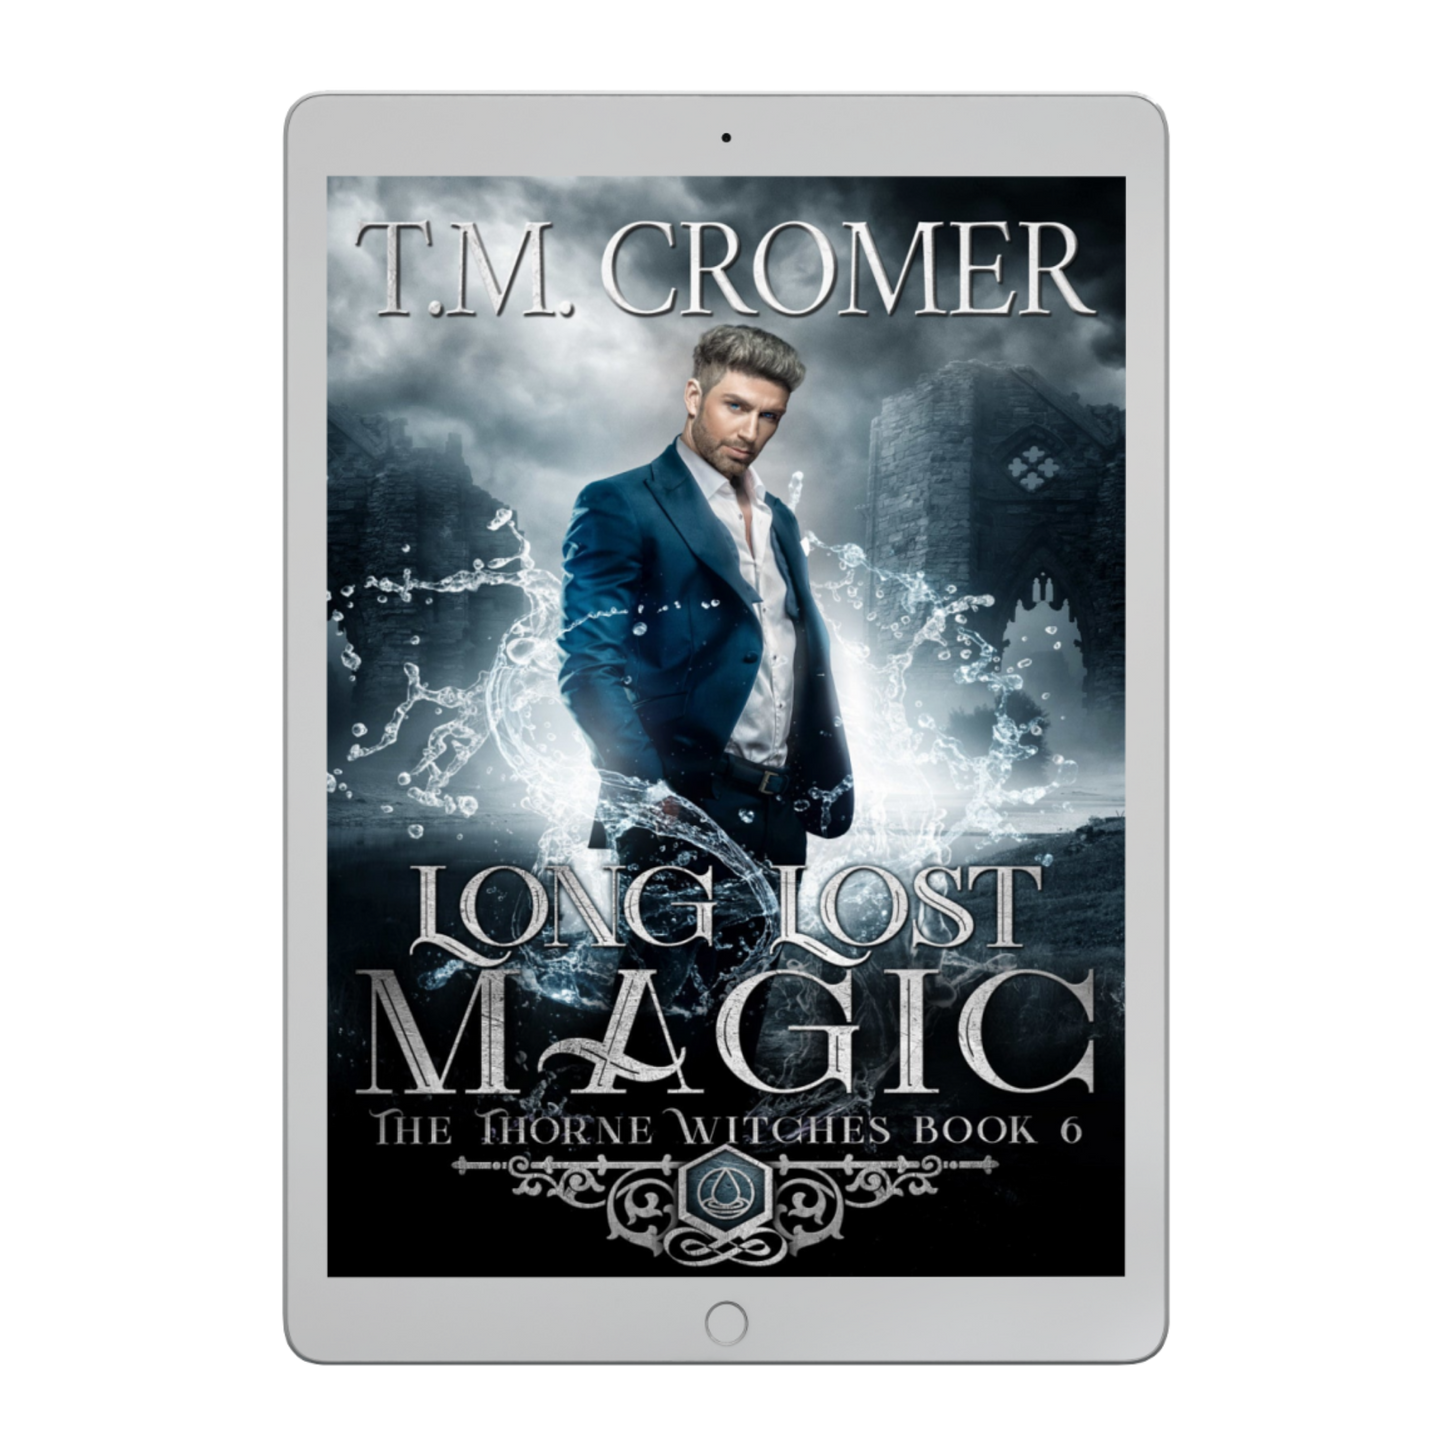 Long Lost Magic Ebook The Thorne Witches #6 Paranormal Romance, Urban Fantasy, Magical Realism